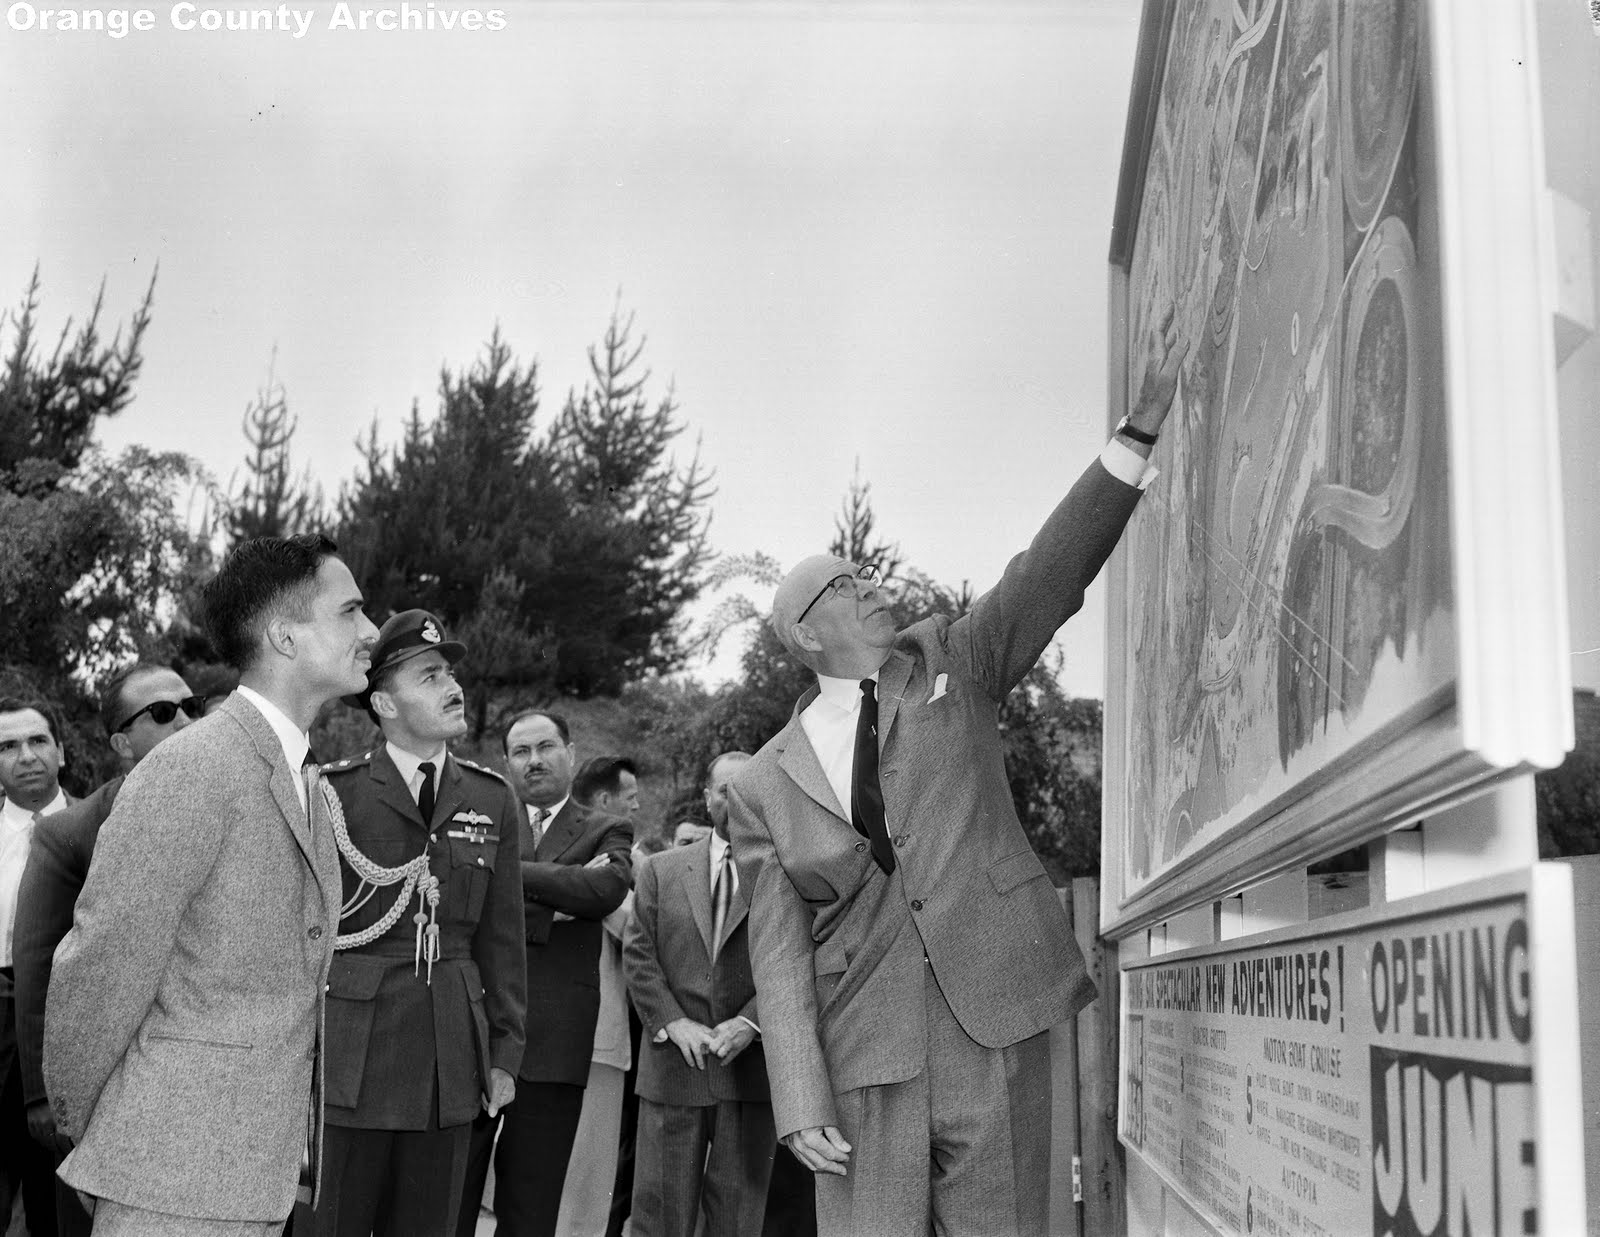 Fowler (right) shows King Hussein of Jordan a map of future Disneyland attractions, April 1959 (Orange County Archives/Public Domain)